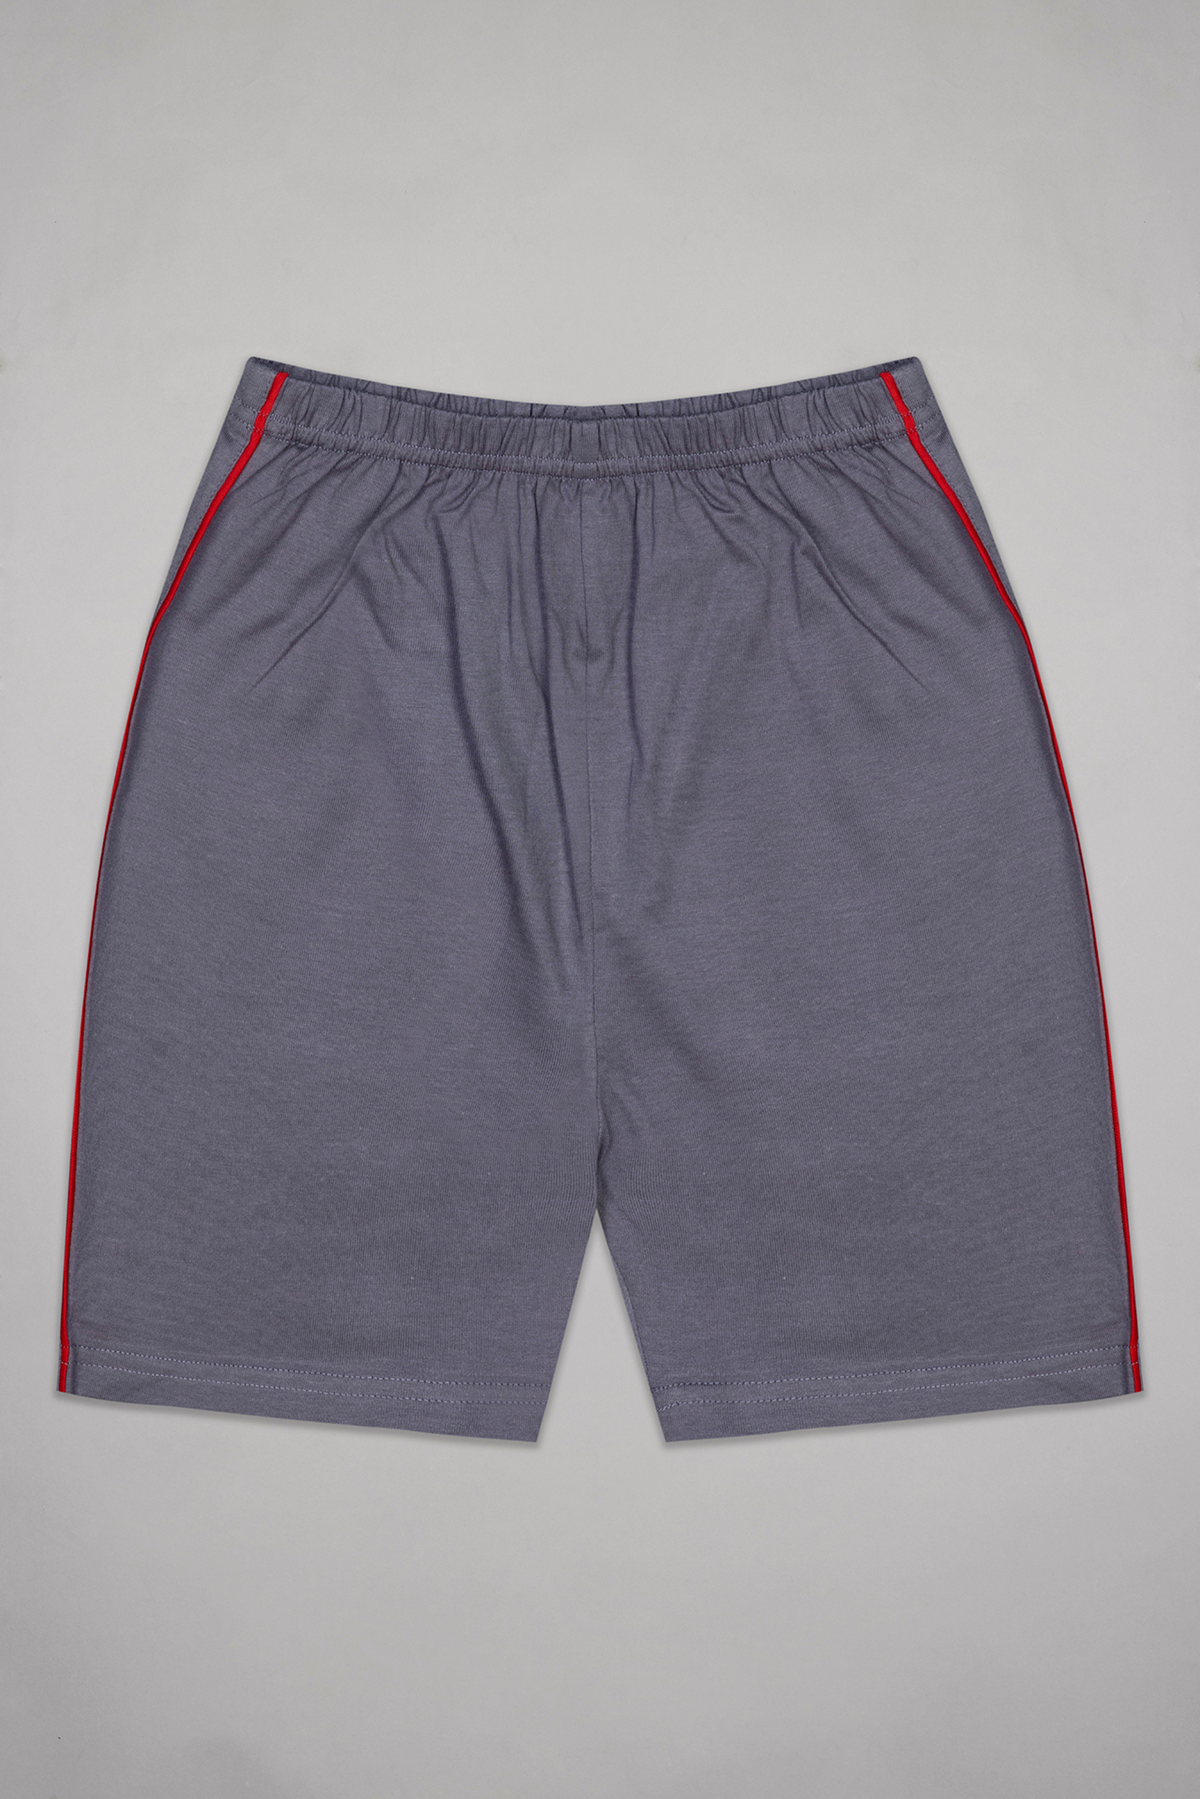 Red Snooze Shorts Set For Boys 5